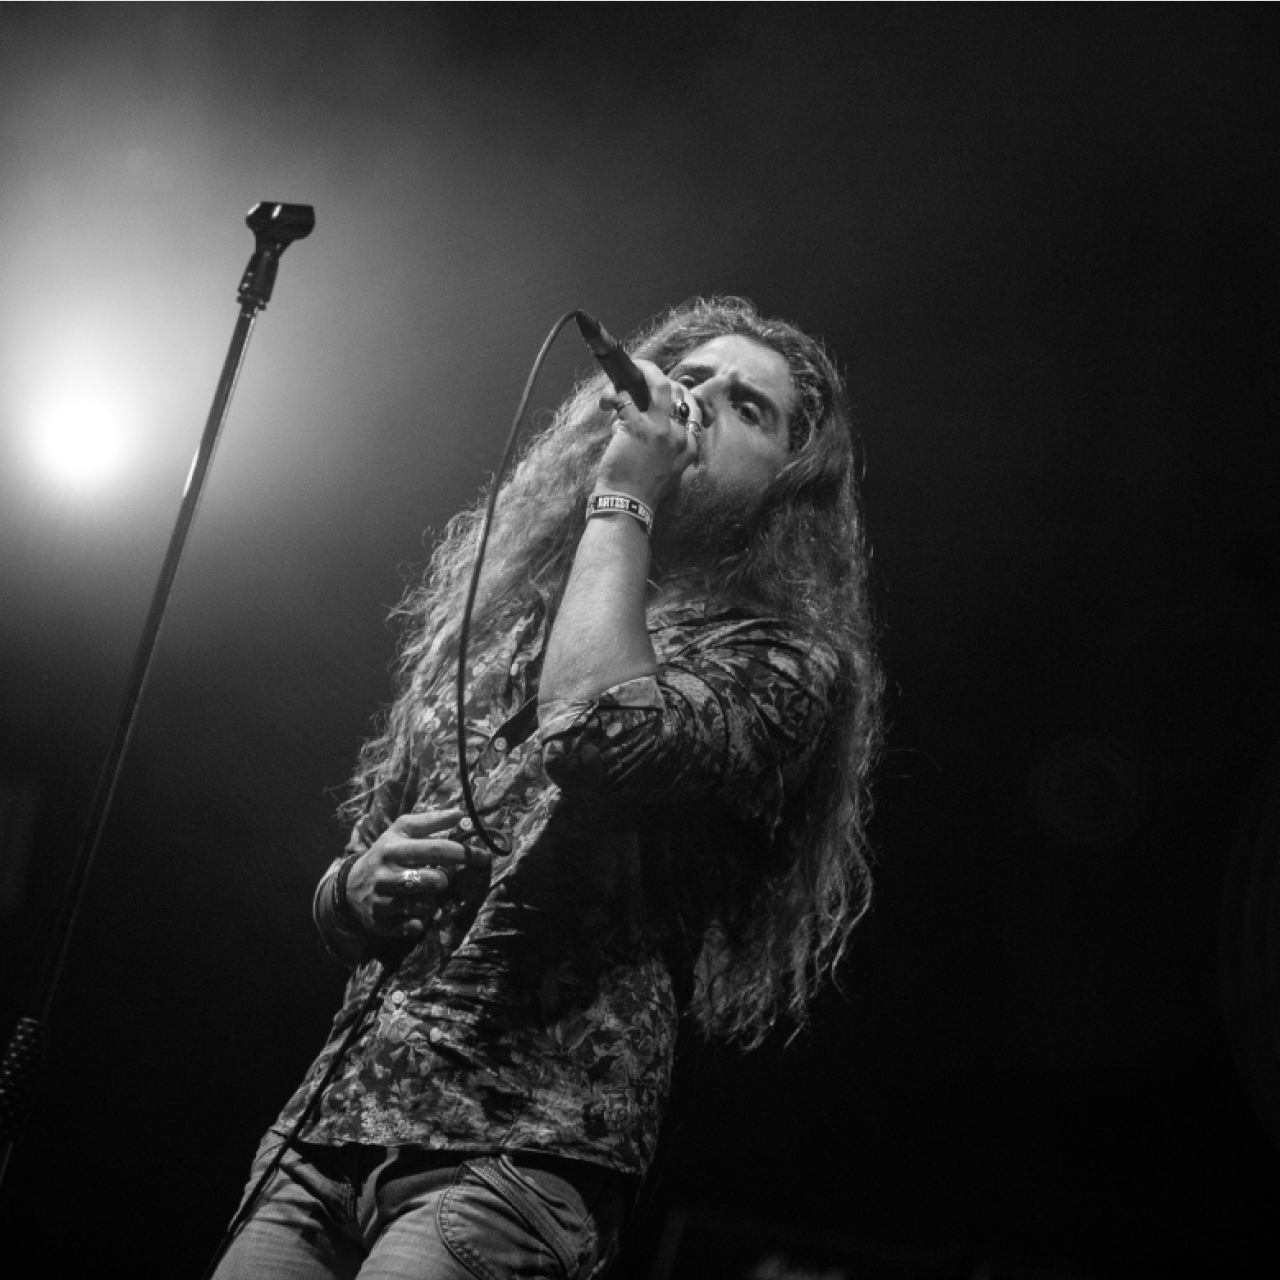 A man with long hair singing into a microphone.